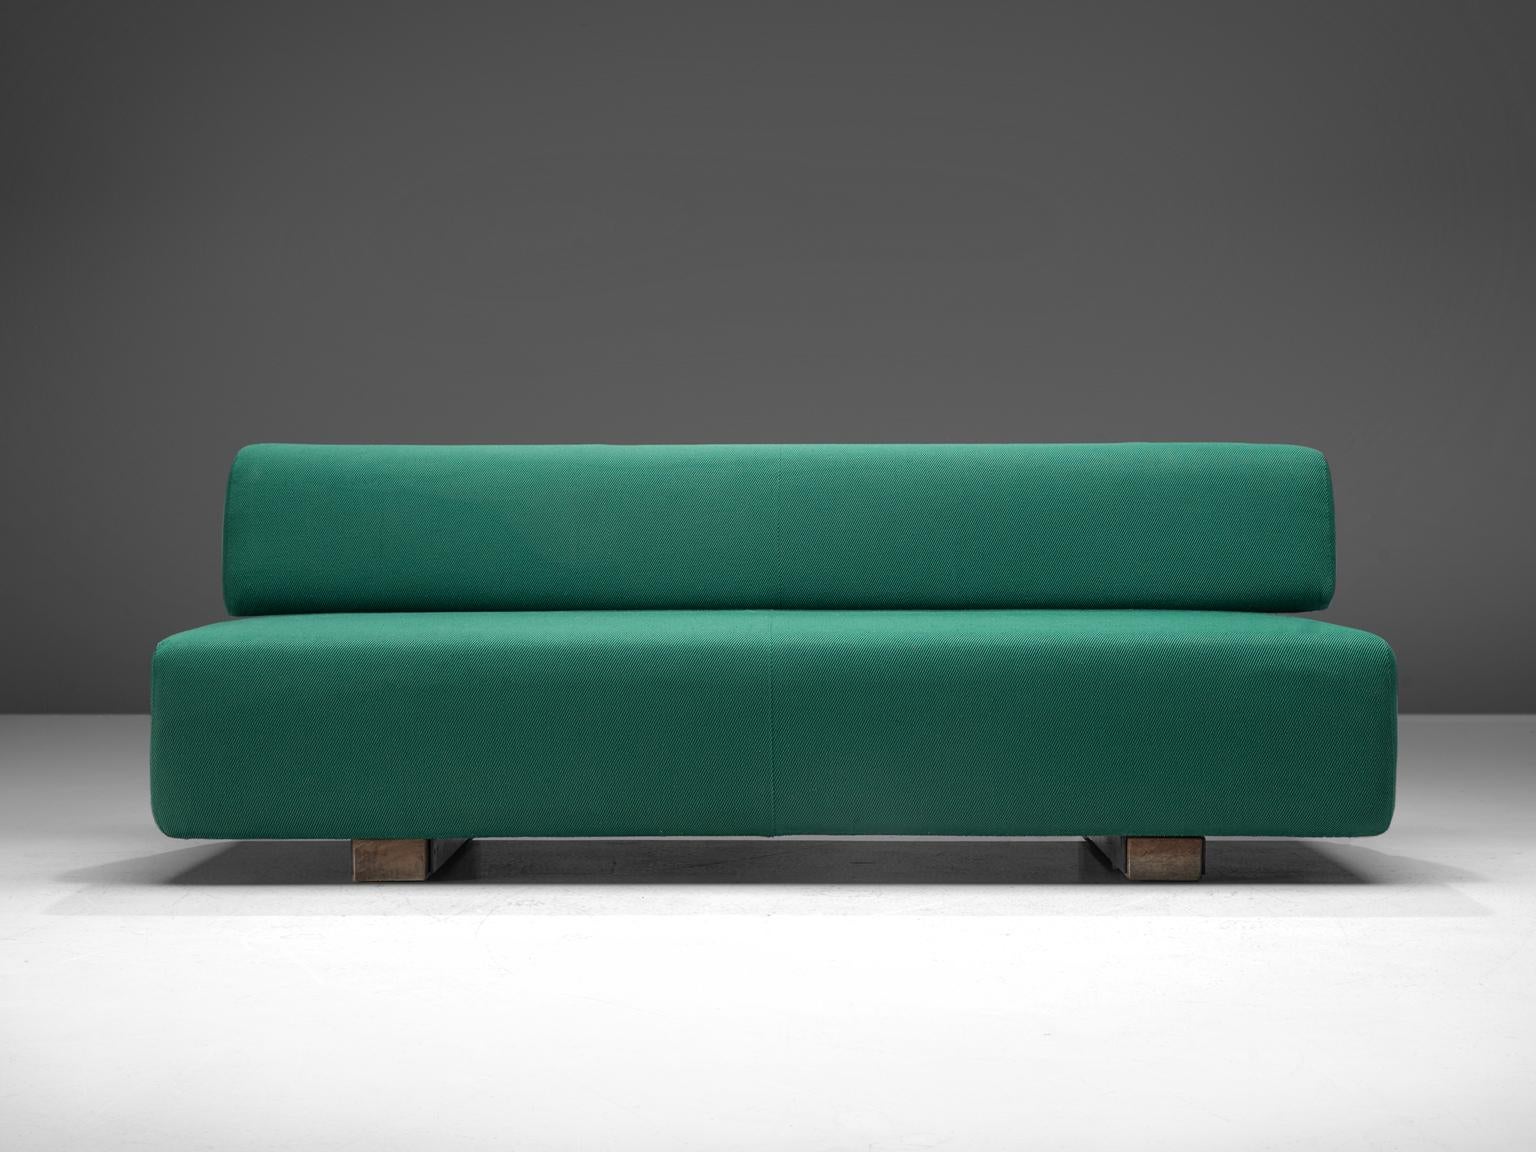 Christophe Gevers, sofa, wool, lacquered steel and wood, Belgium, 1972

Stunning canapé by Belgian designer Christoph Gevers in 1972. This sofa mirrors exactly the design philosophy Gevers is known for; well balanced proportions and total absence